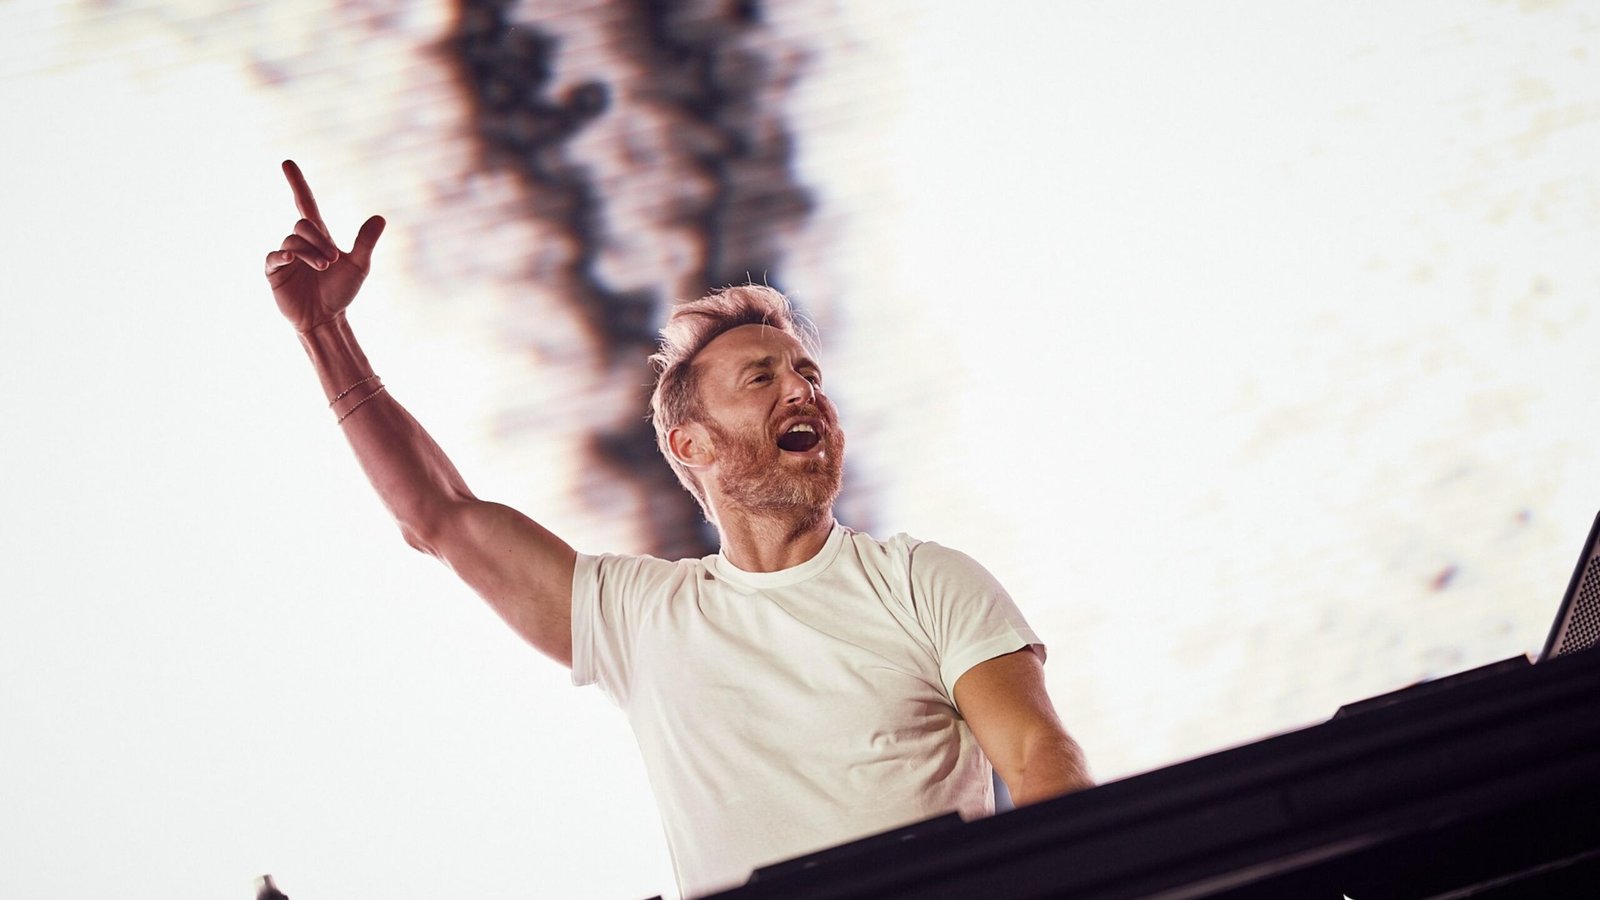 David Guetta And Benny Benassi Celebrate 20 Years Of ‘Satisfaction’ With Monstrous Modern Rework